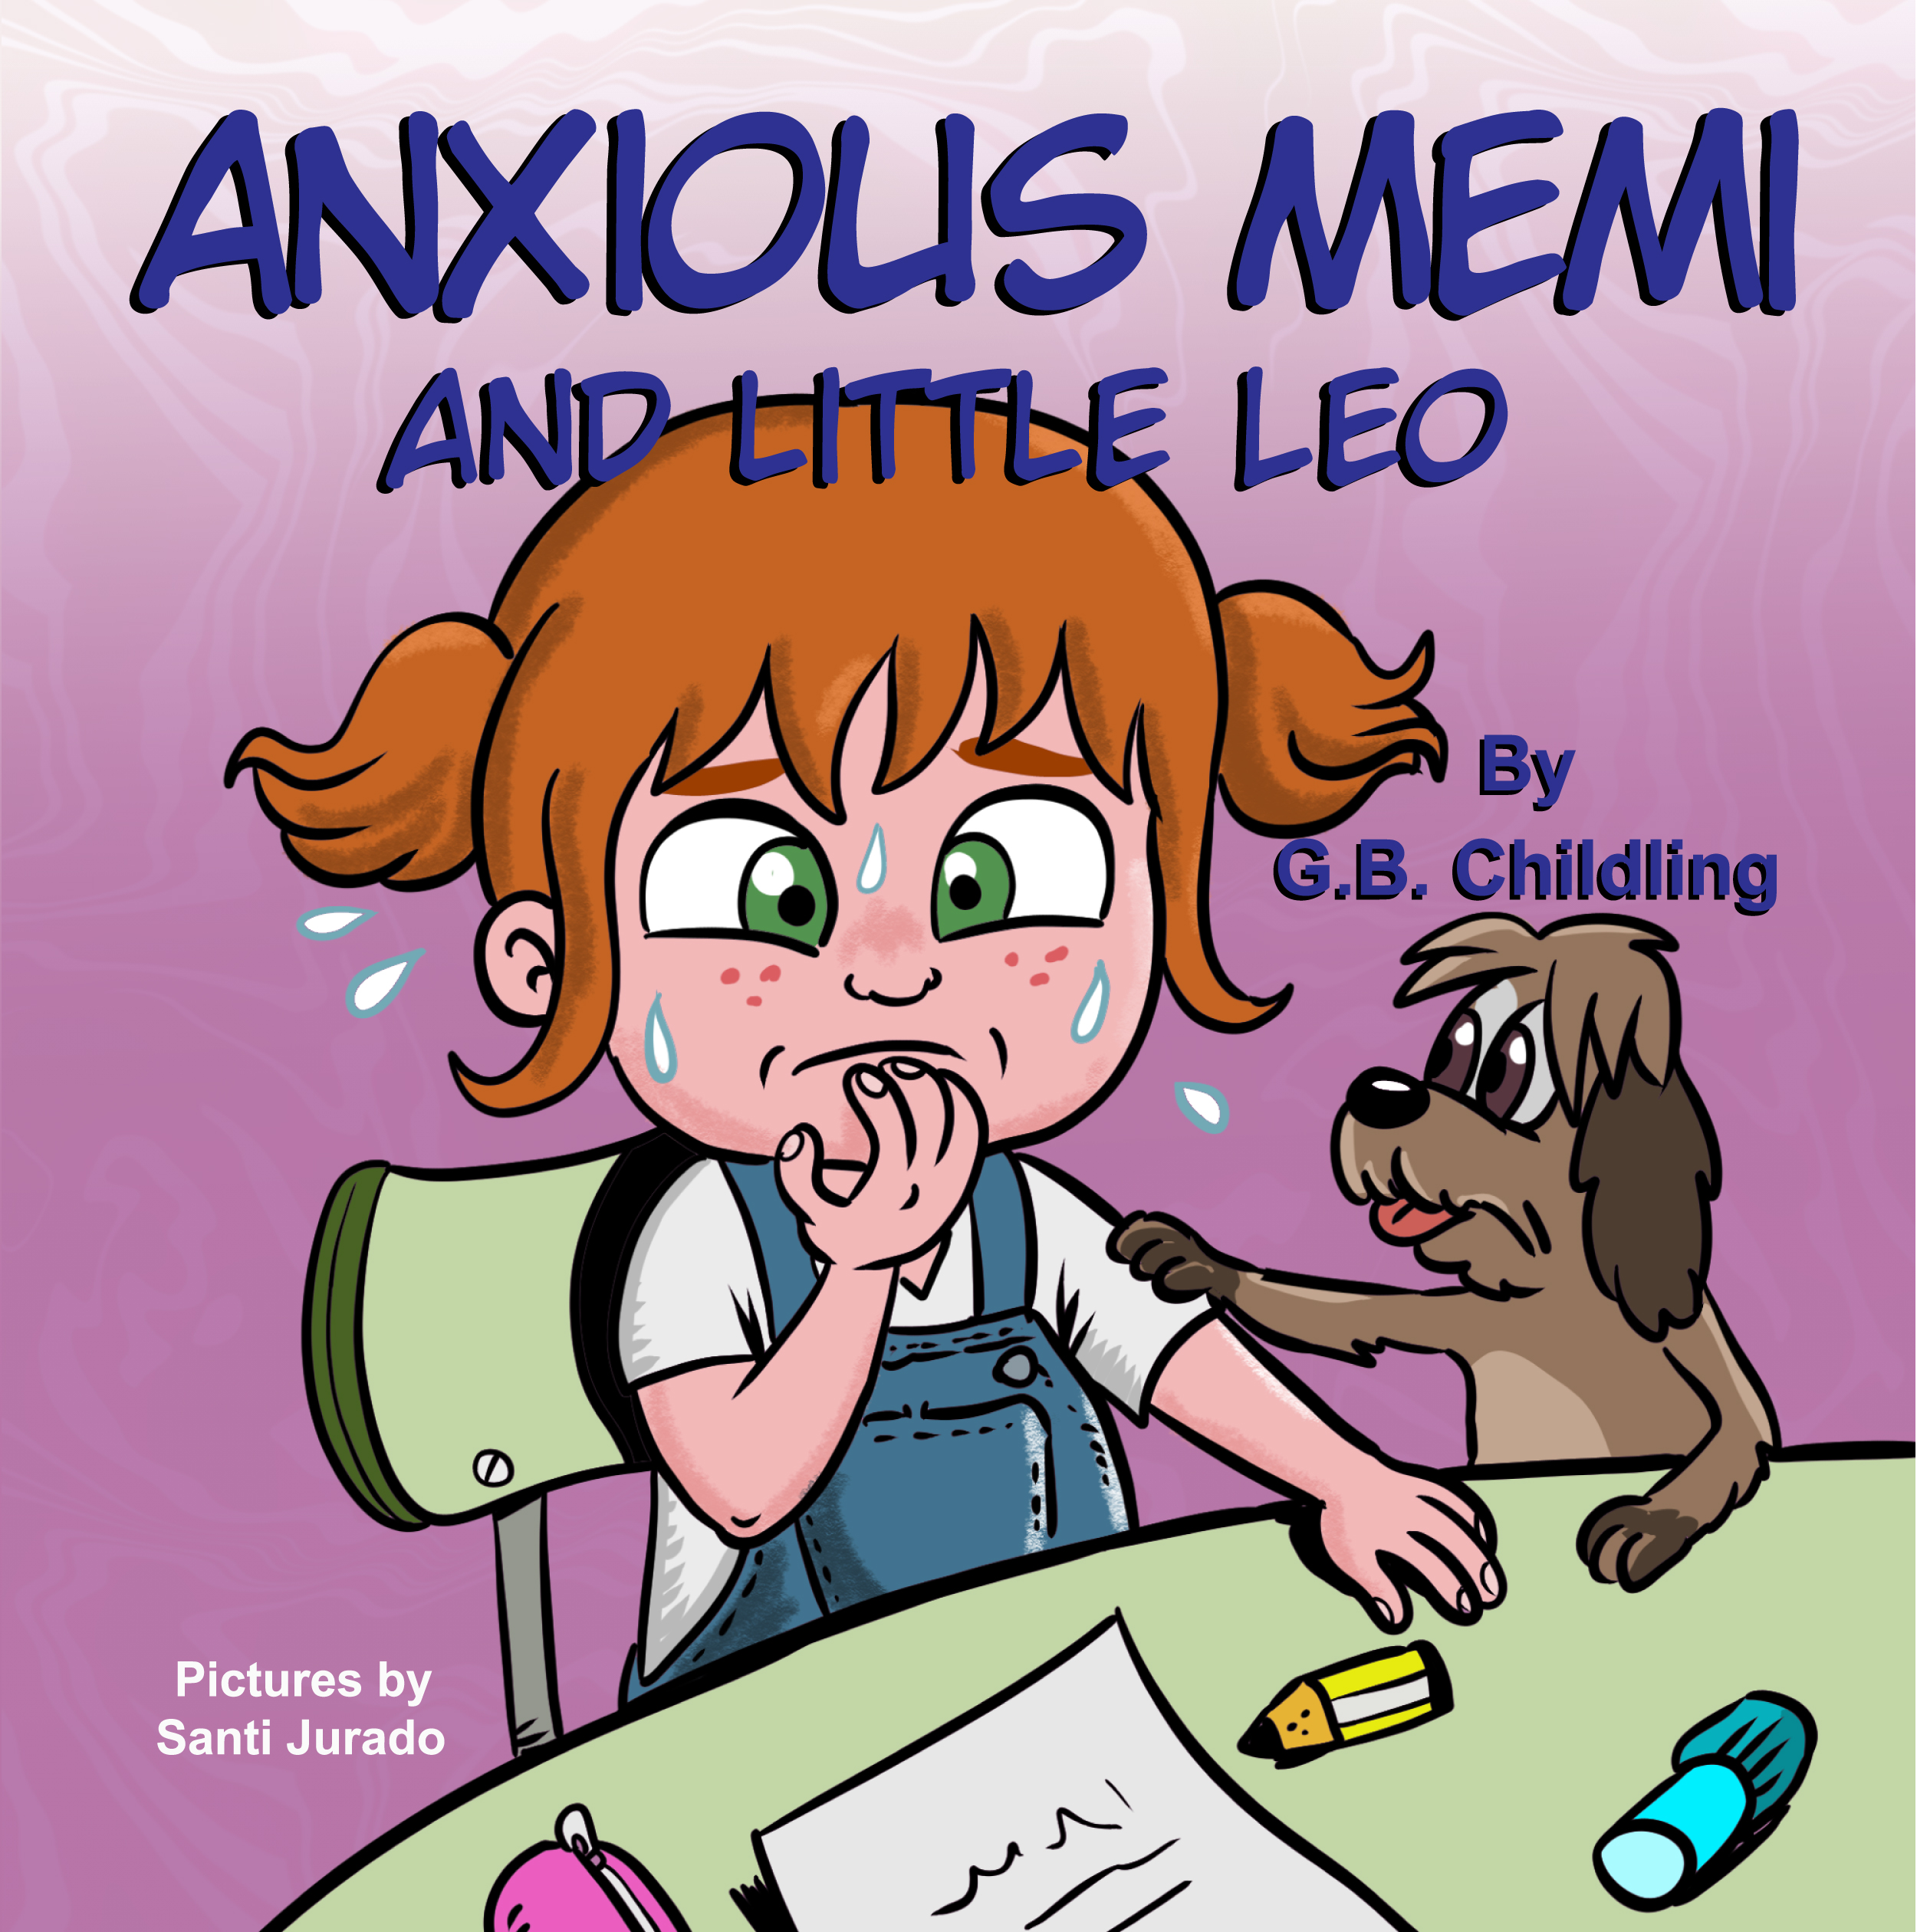 FREE: Anxious Memi and little Leo by G.B.Childling